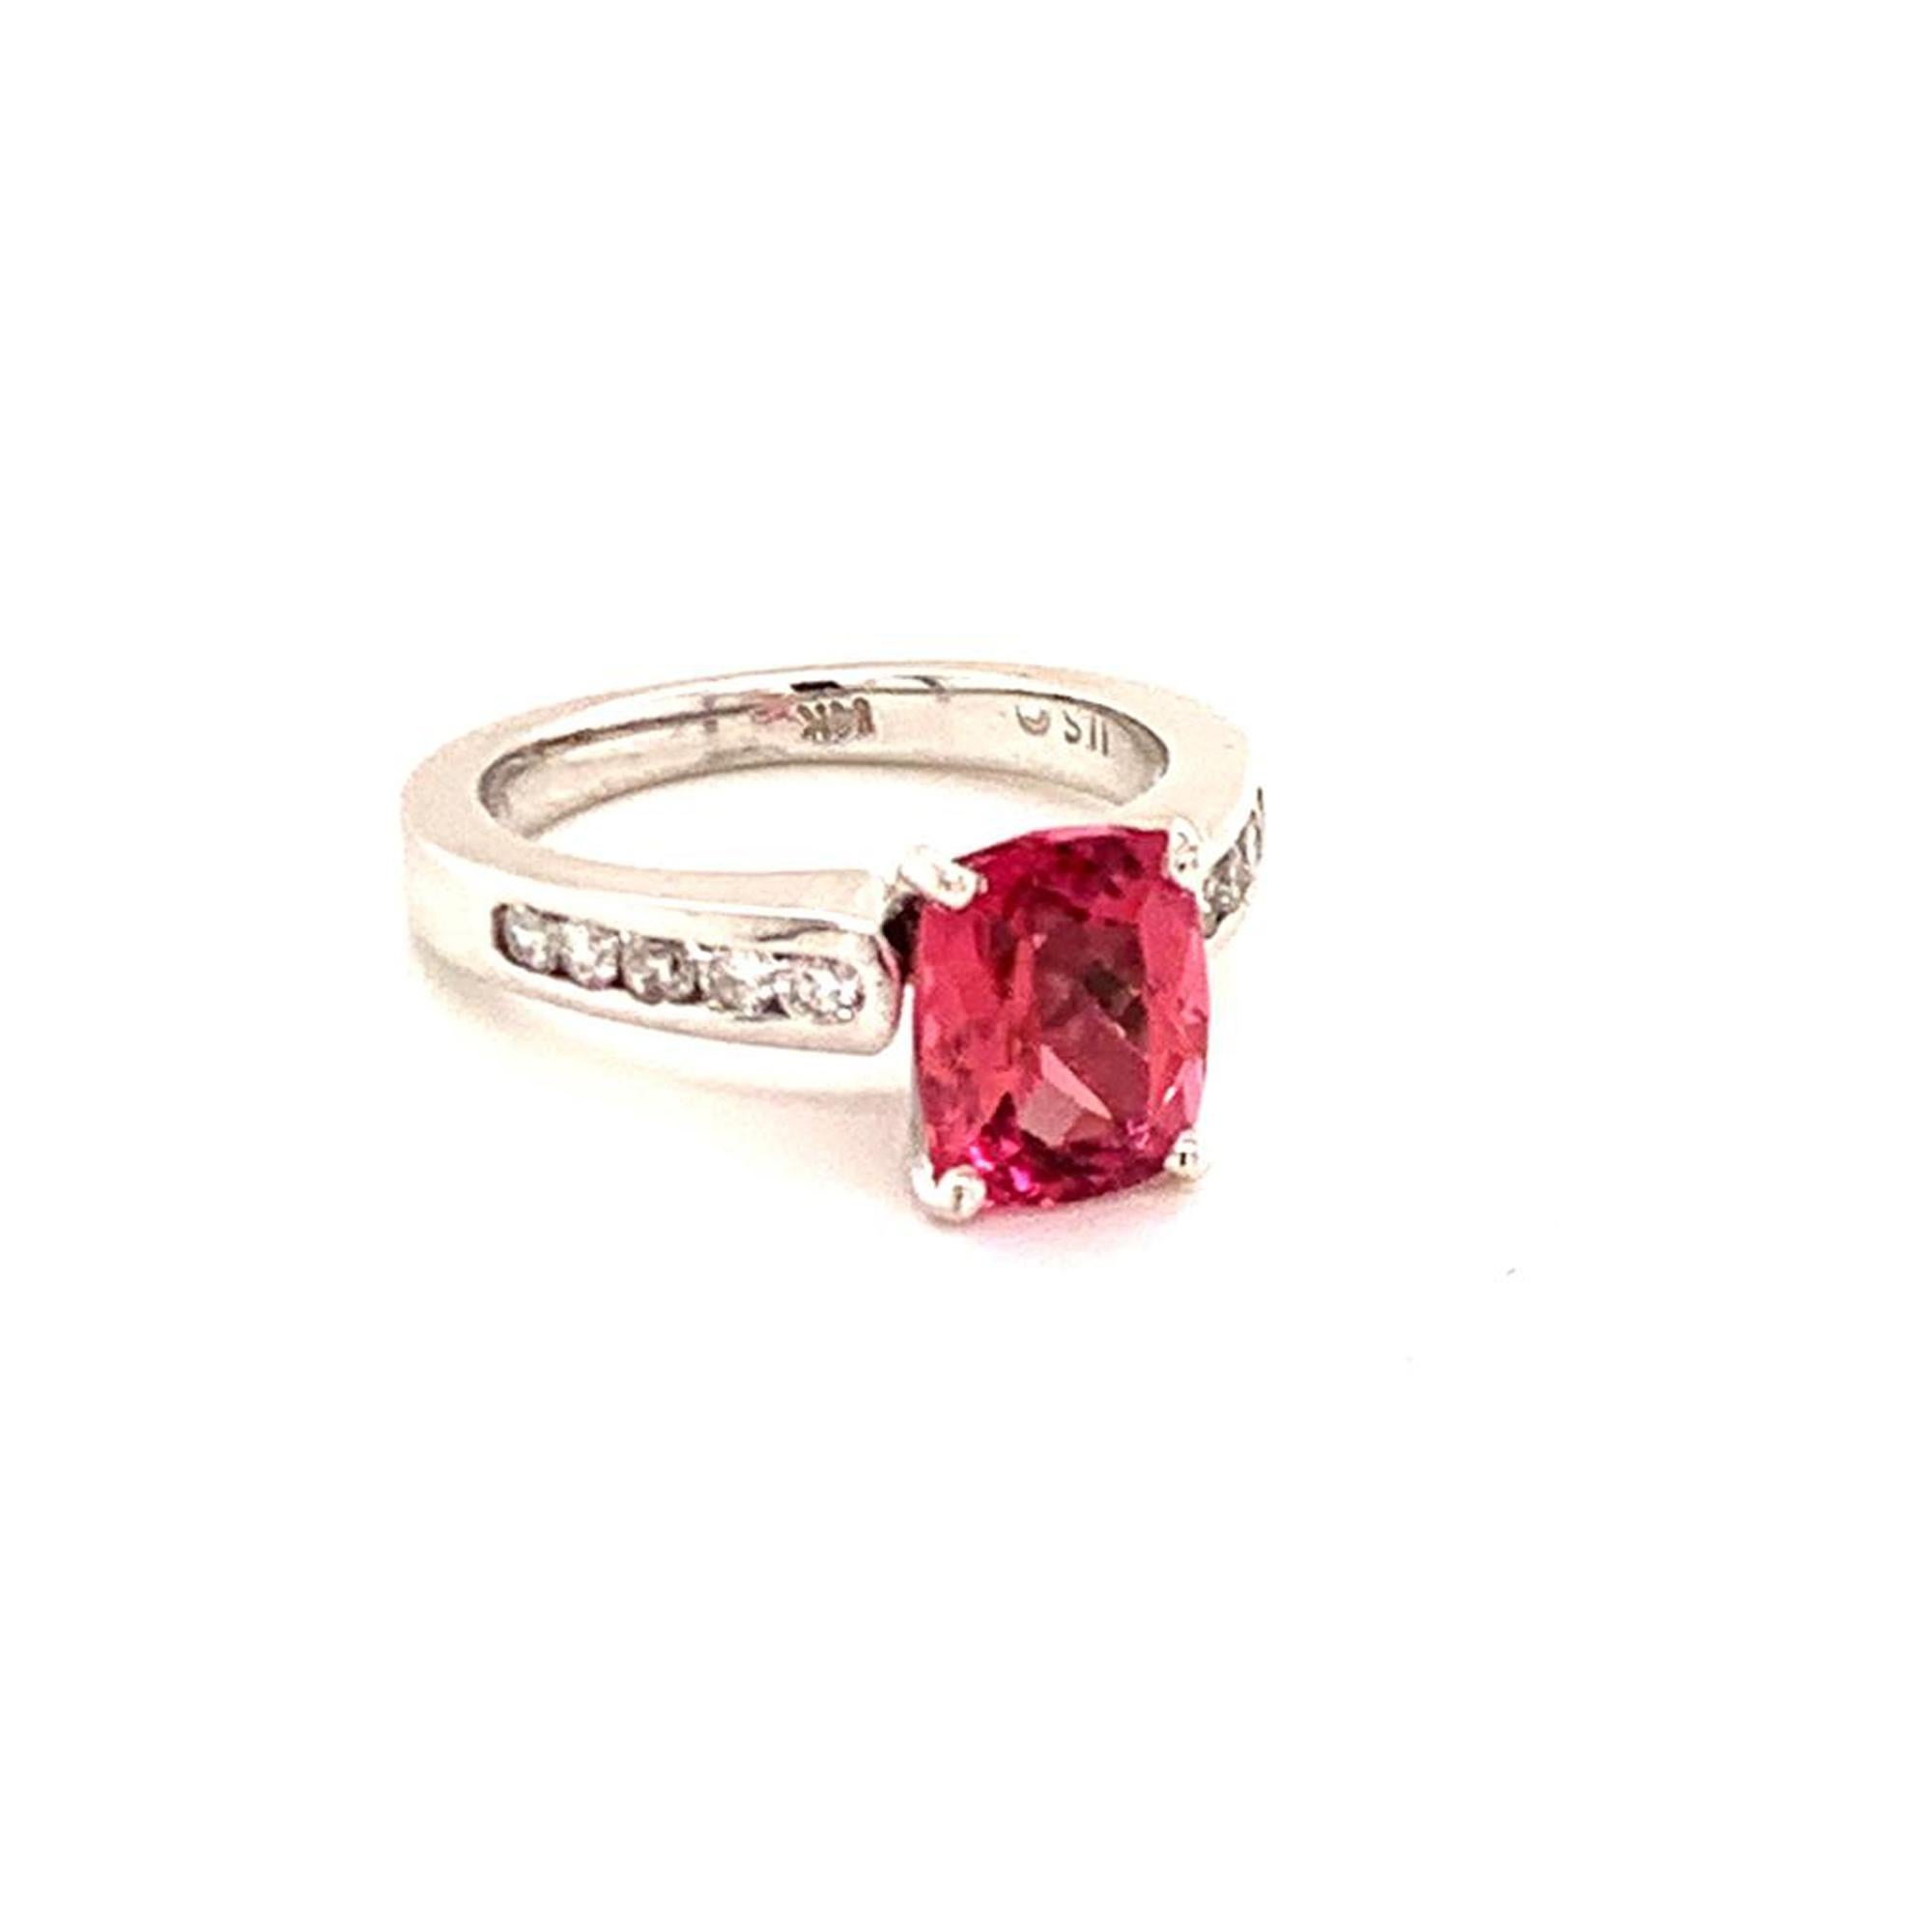 Diamond Rubellite Tourmaline Ring 3 TCW 14k Gold Certified In New Condition For Sale In Brooklyn, NY